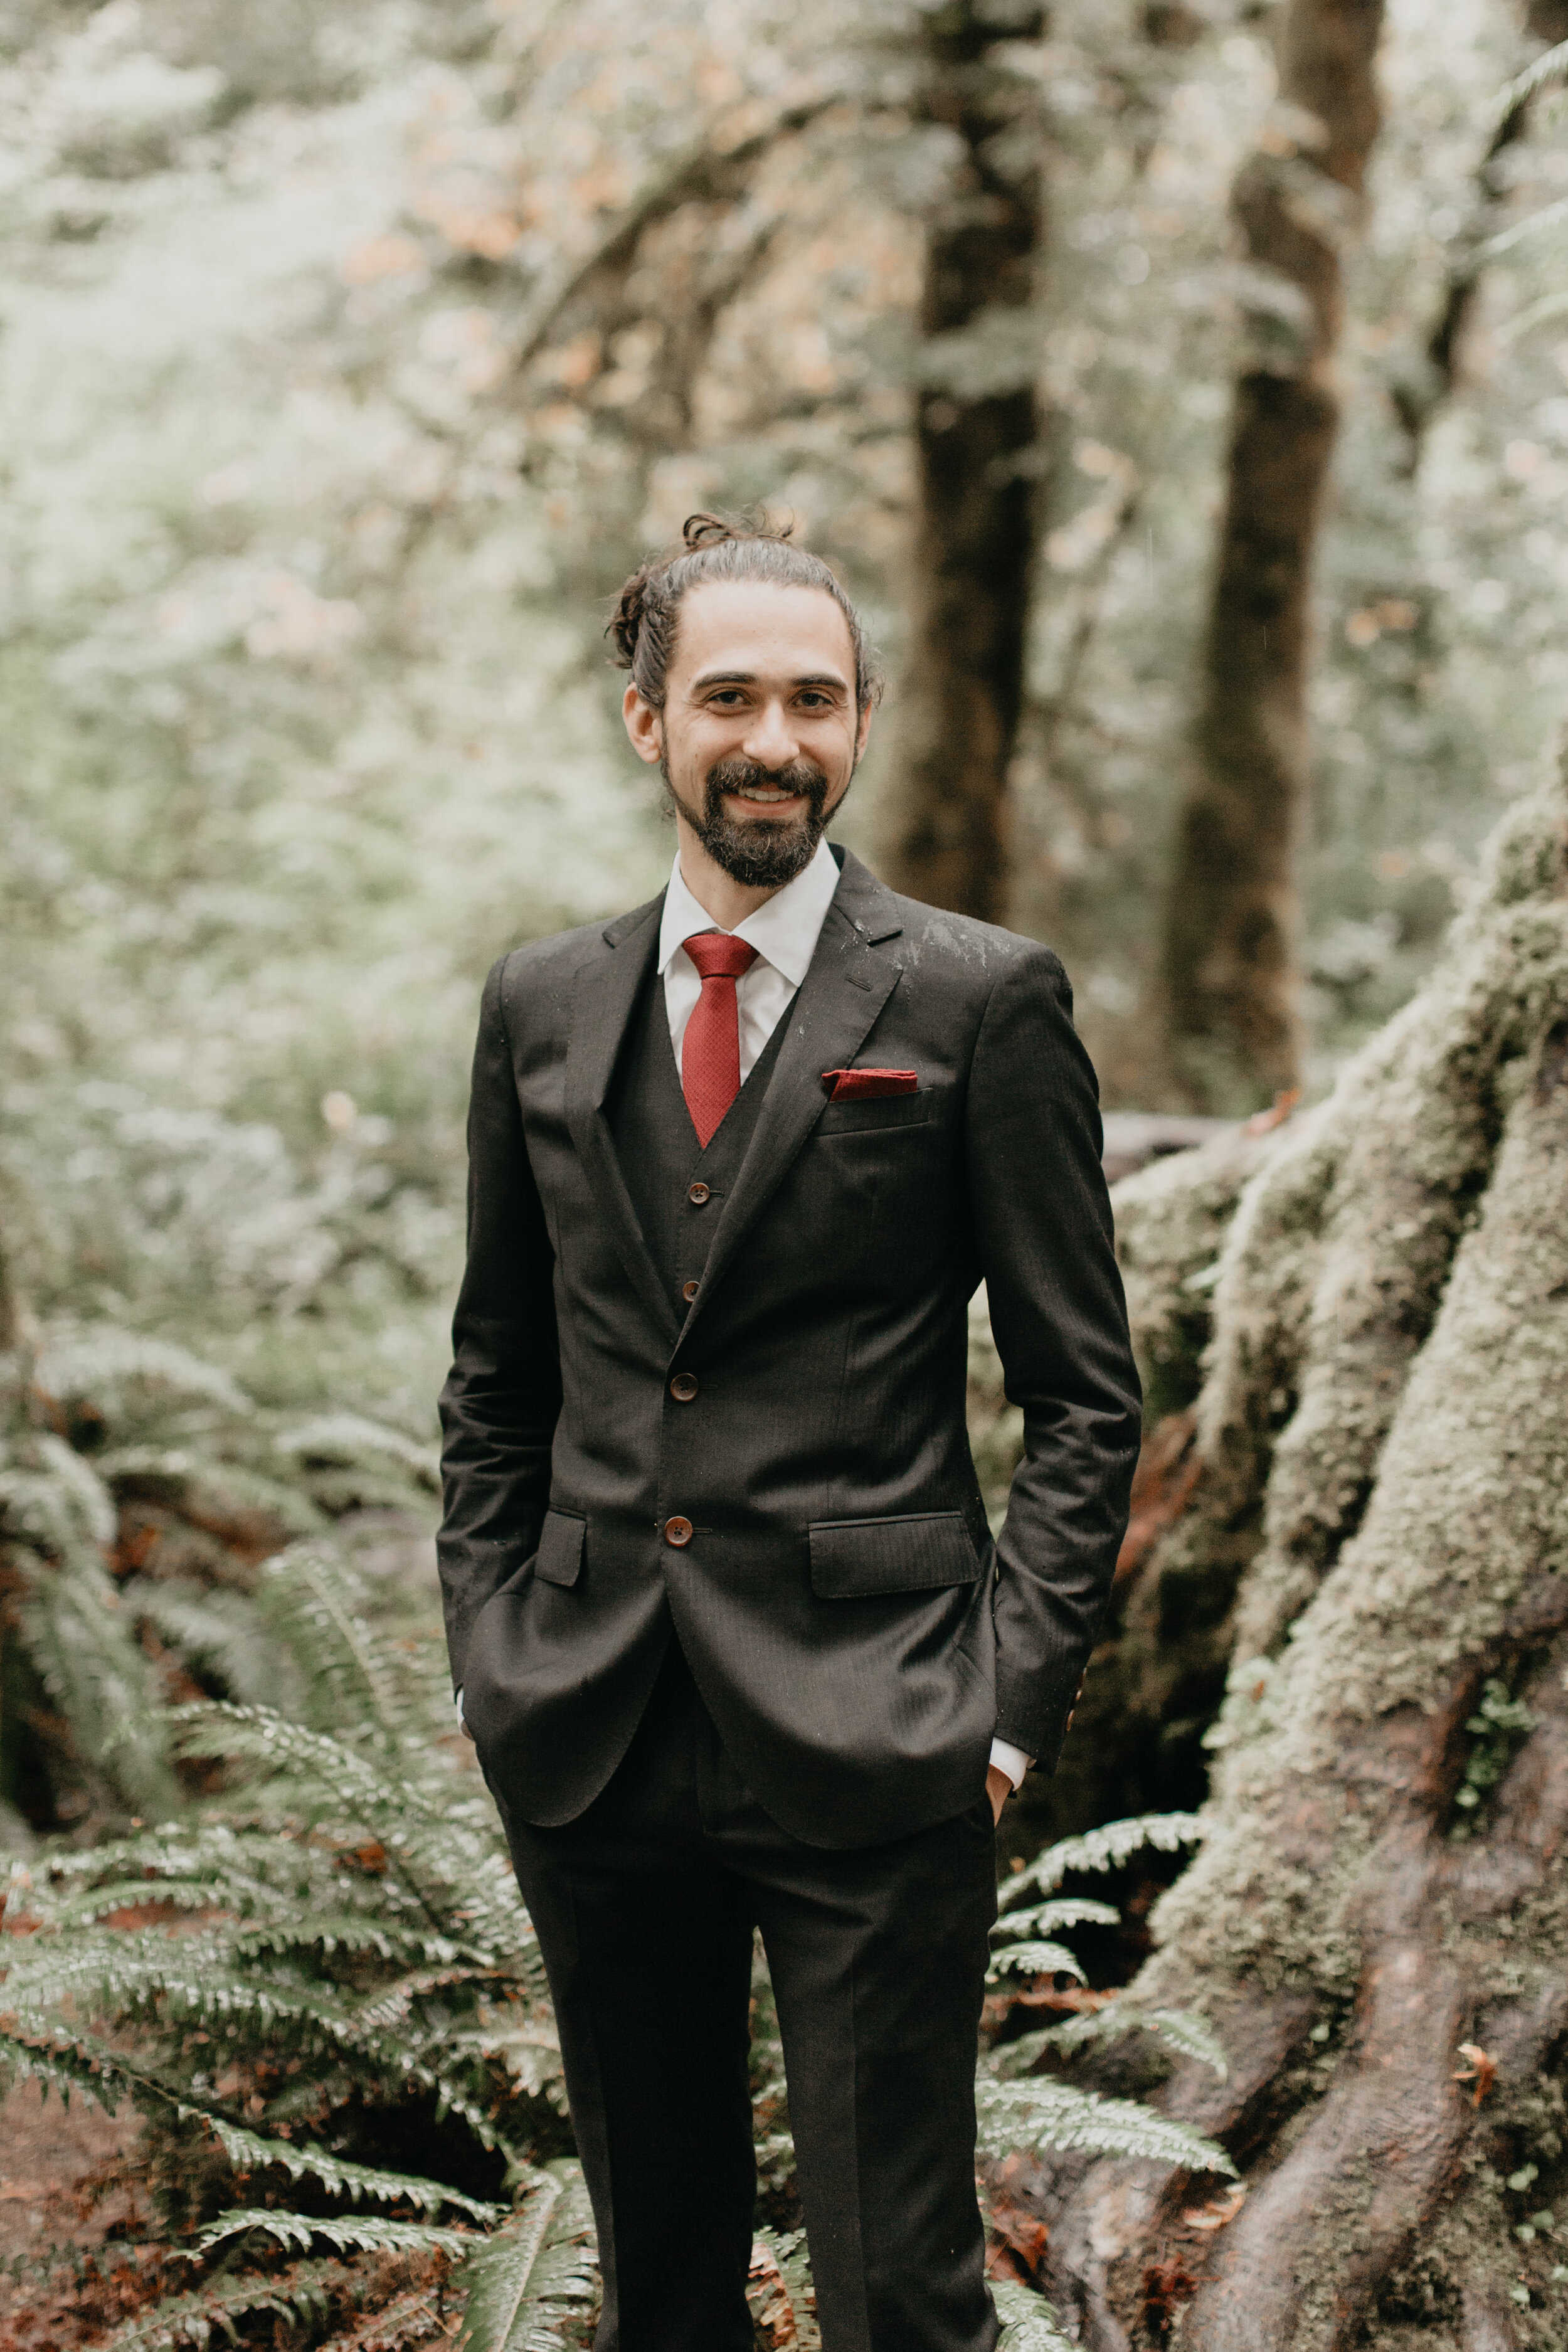 Nicole-Daacke-Photography-Olympic-national-park-elopement-photography-intimiate-elopement-in-olympic-peninsula-washington-state-rainy-day-ruby-beach-hoh-rainforest-elopement-inspiration-rainforest-pnw-elopement-photography-126.jpg